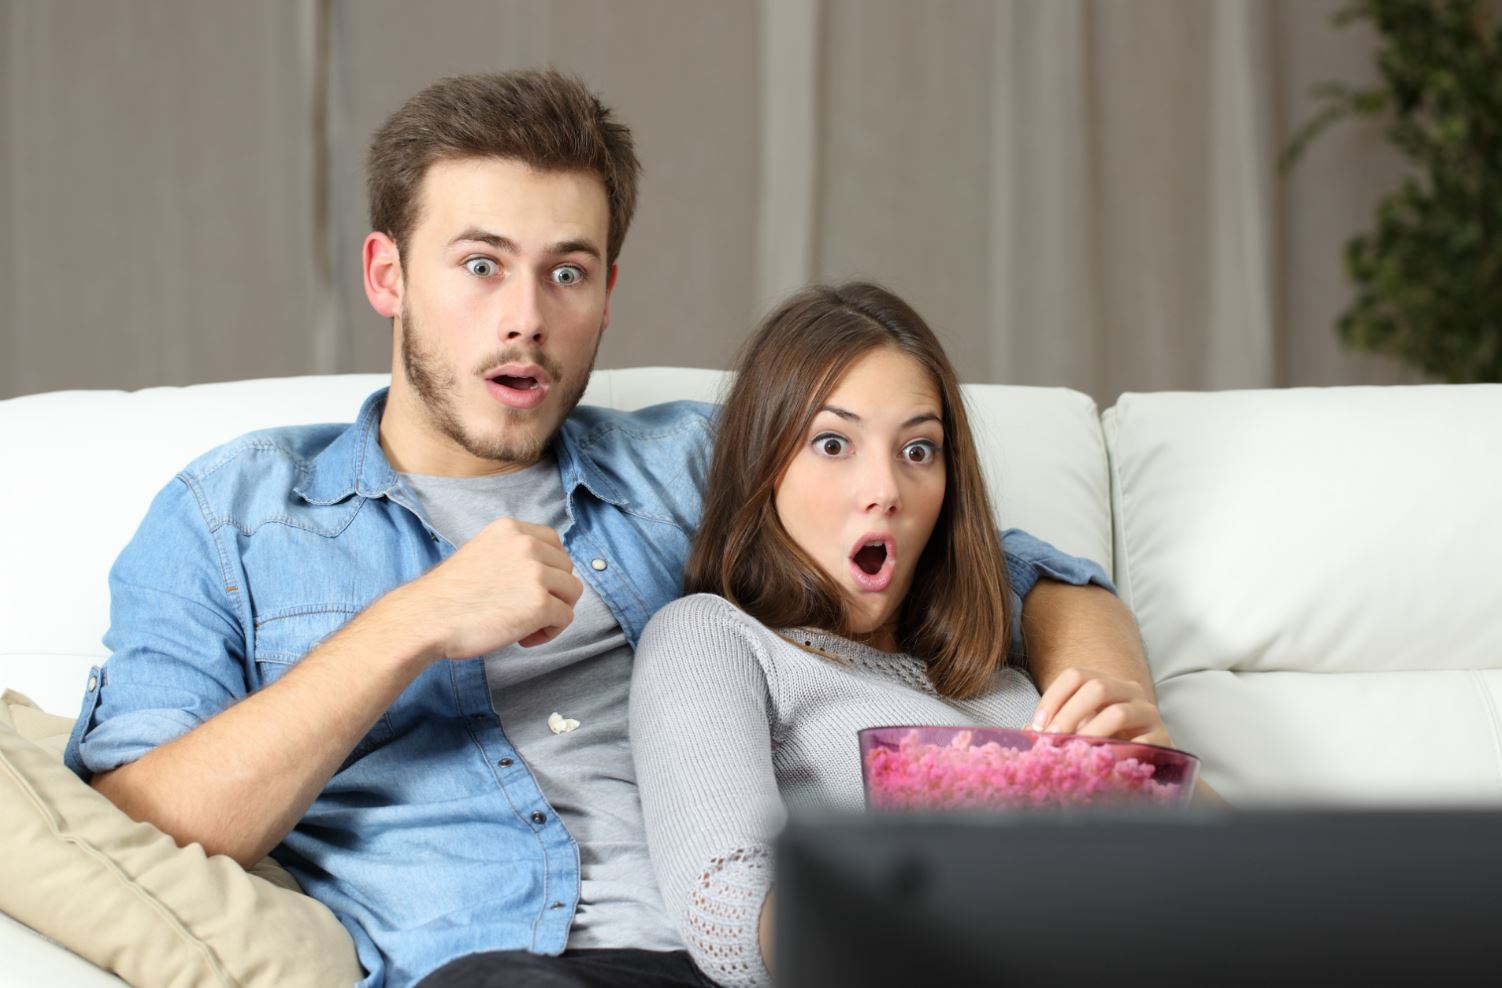 nearly-half-of-netflix-watchers-cheat-on-their-significant-other-wkyc